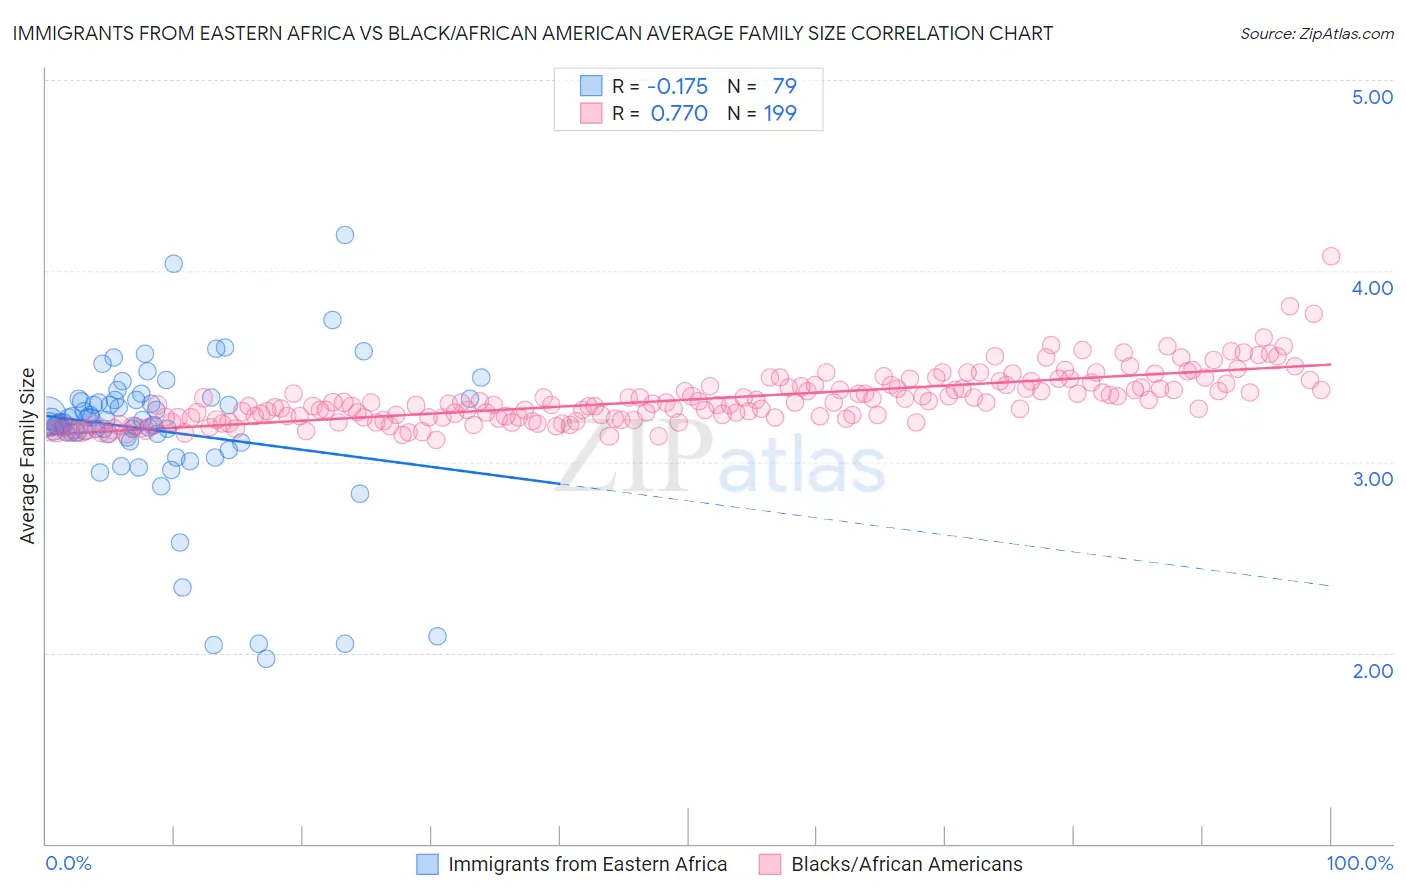 Immigrants from Eastern Africa vs Black/African American Average Family Size